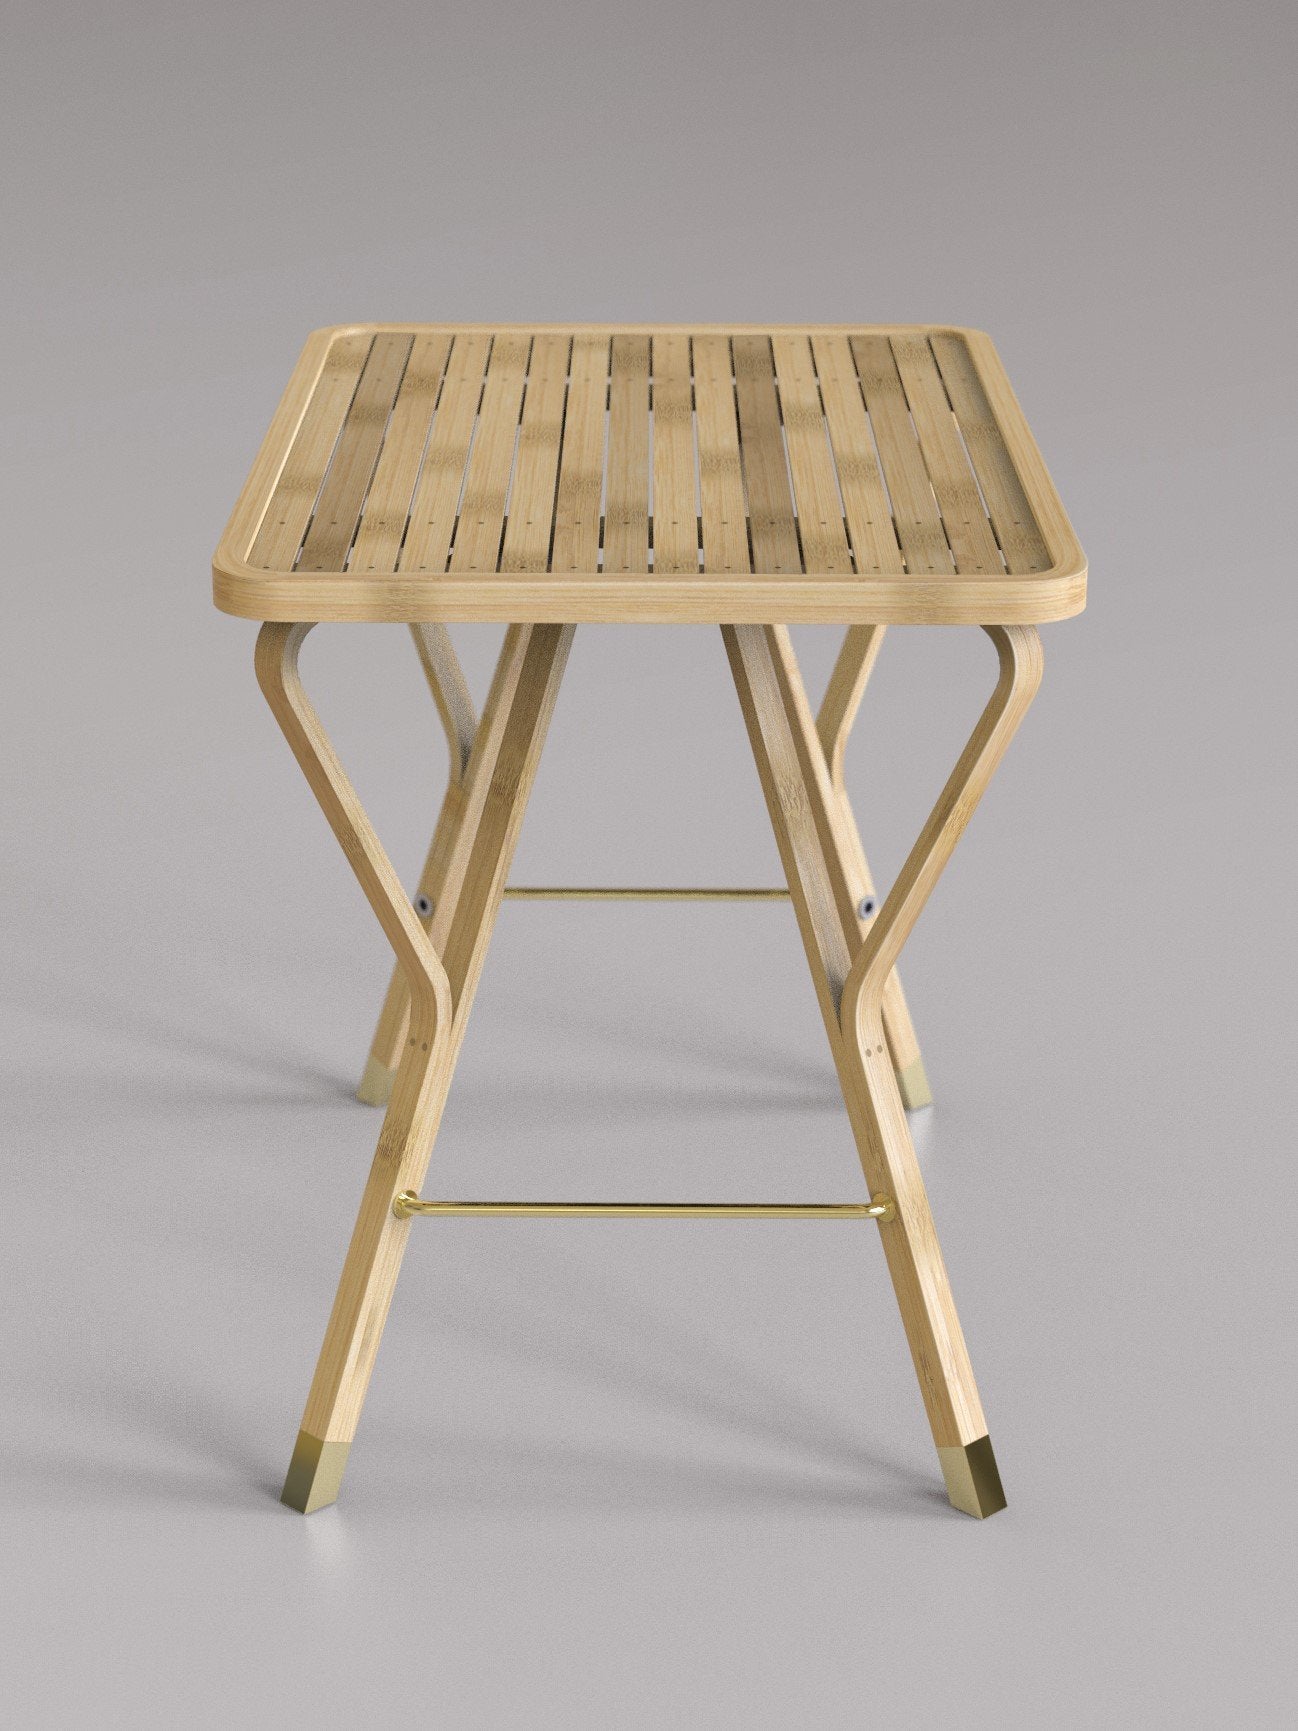 Hiran Bamboo Table-Furnishings-BAMBOO, TABLES-Forest Homes-Nature inspired decor-Nature decor